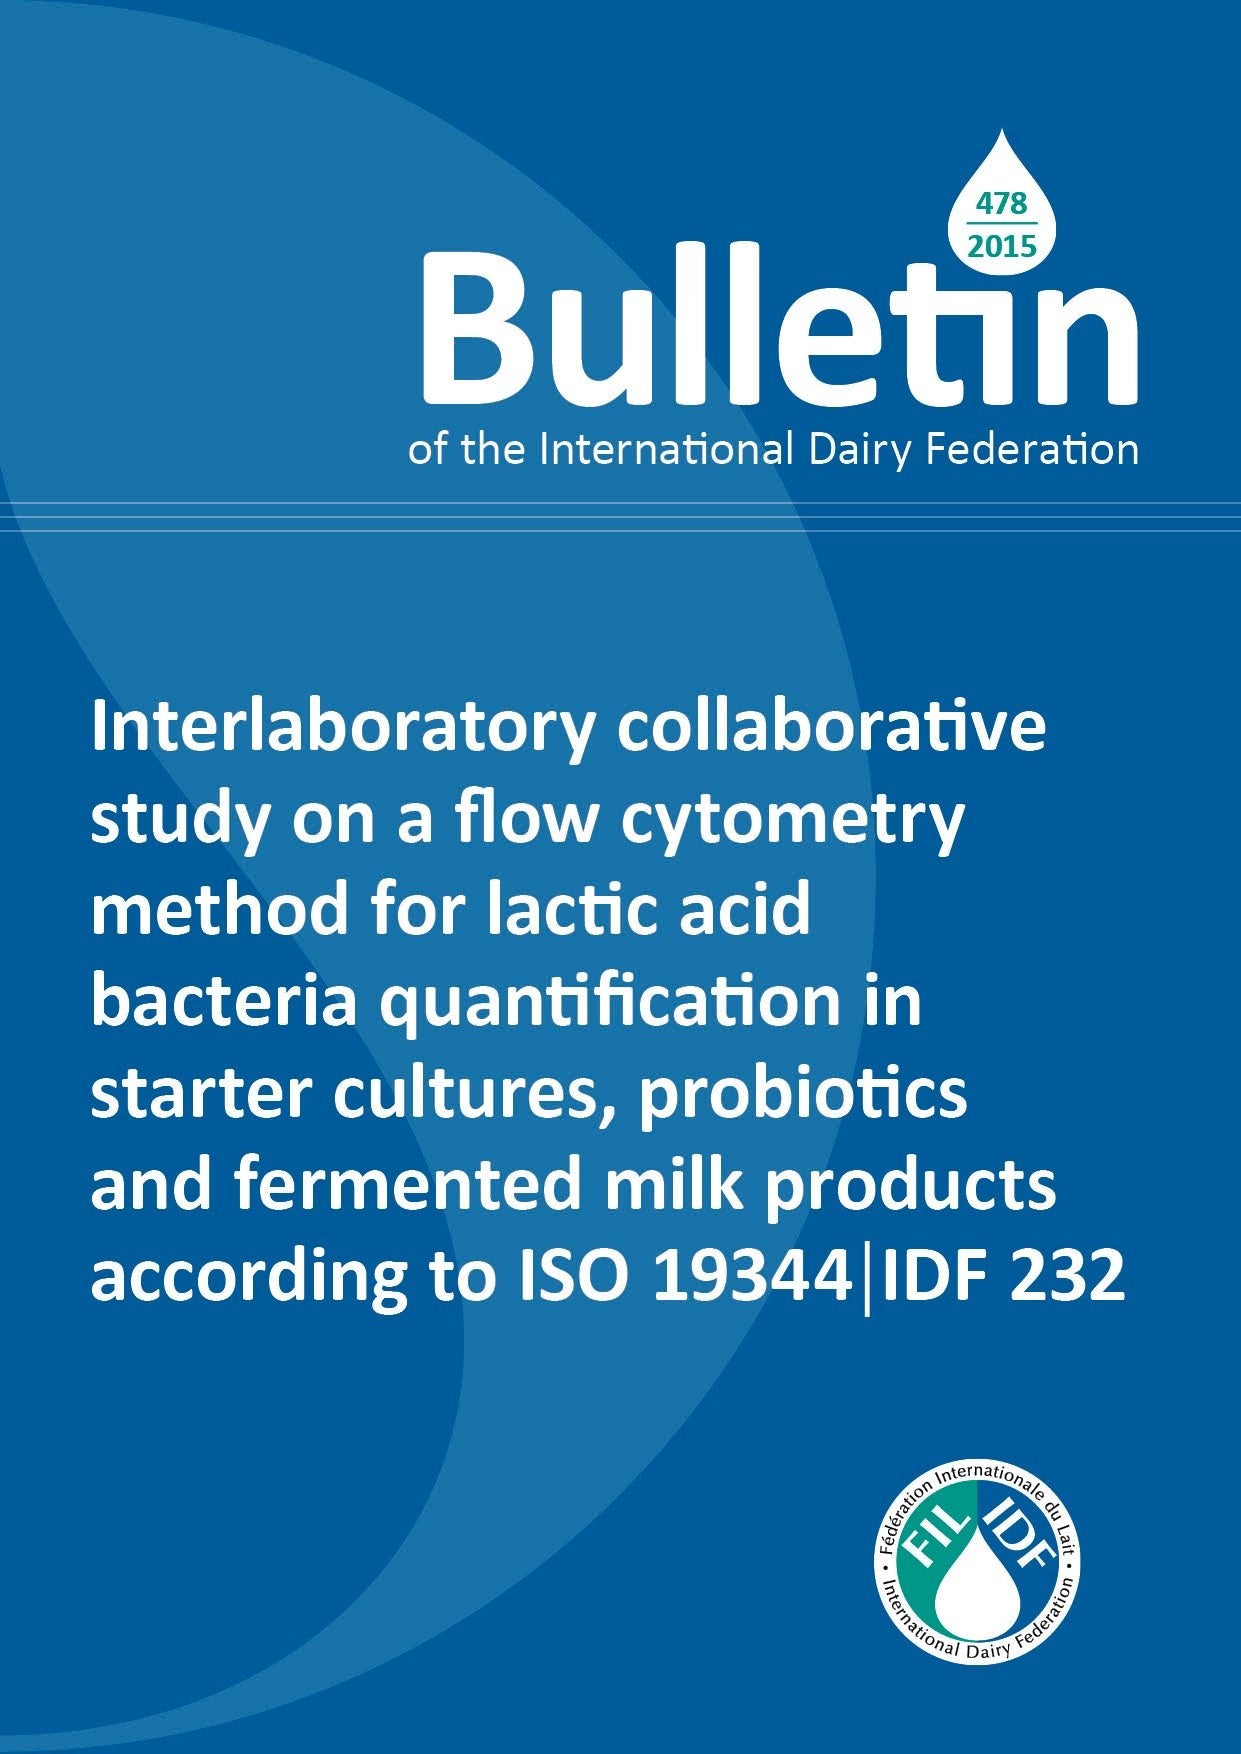 Bulletin of the IDF N° 478/2015: Interlaboratory collaborative study on a flow cytometry method for lactic acid bacteria quantification in starter cultures, probiotics and fermented milk products according to ISO 19344 | IDF 232 - FIL-IDF